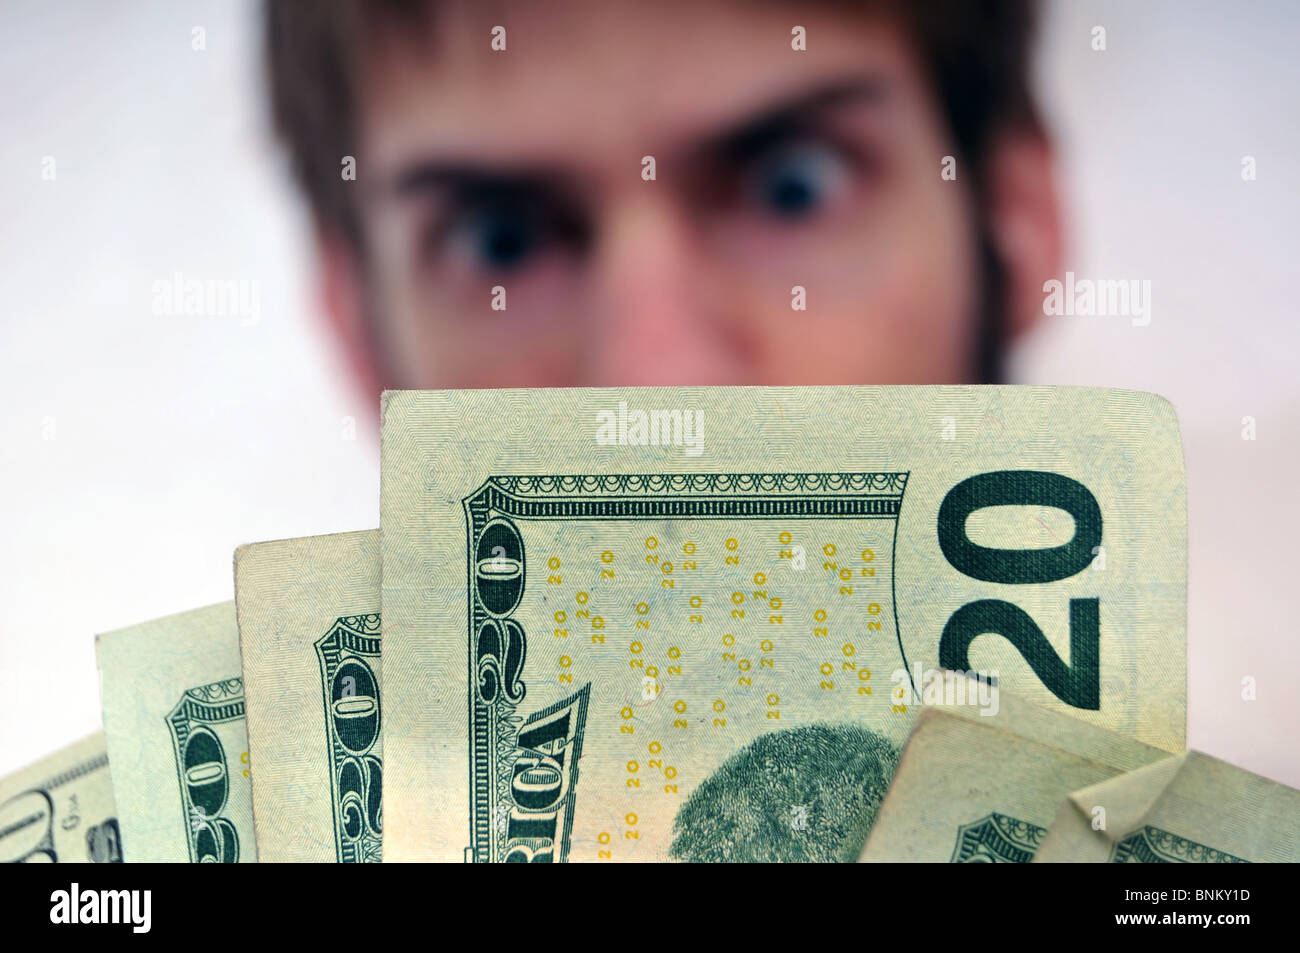 Blurred Man in background staring at a wad of cash, with an intentional slightly dramatic blue tint. Stock Photo